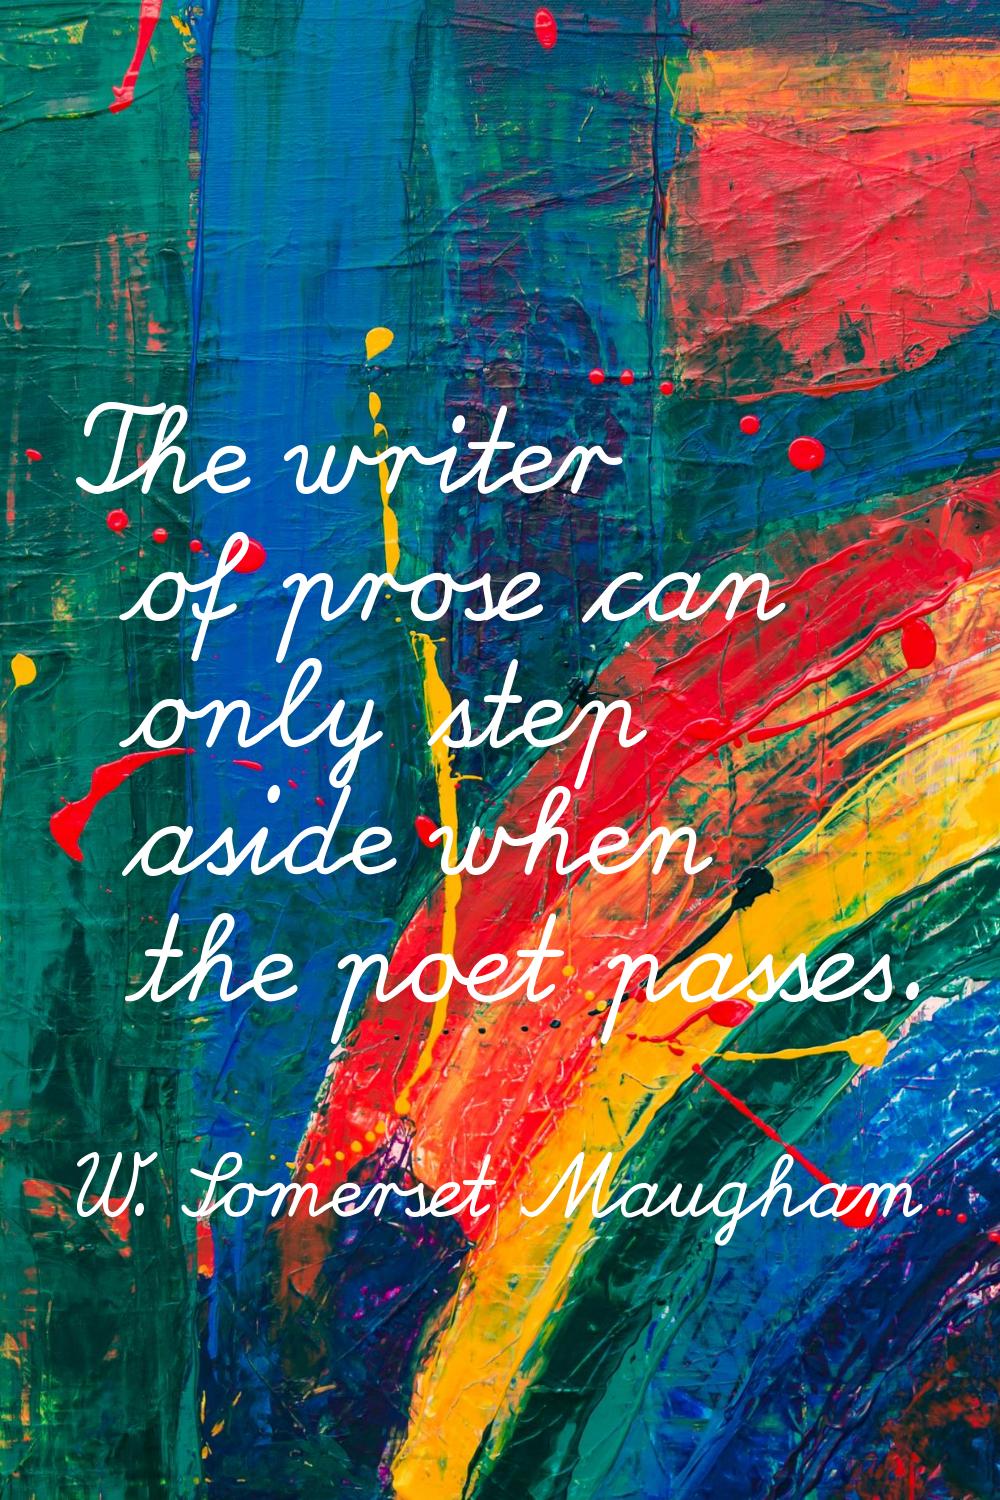 The writer of prose can only step aside when the poet passes.